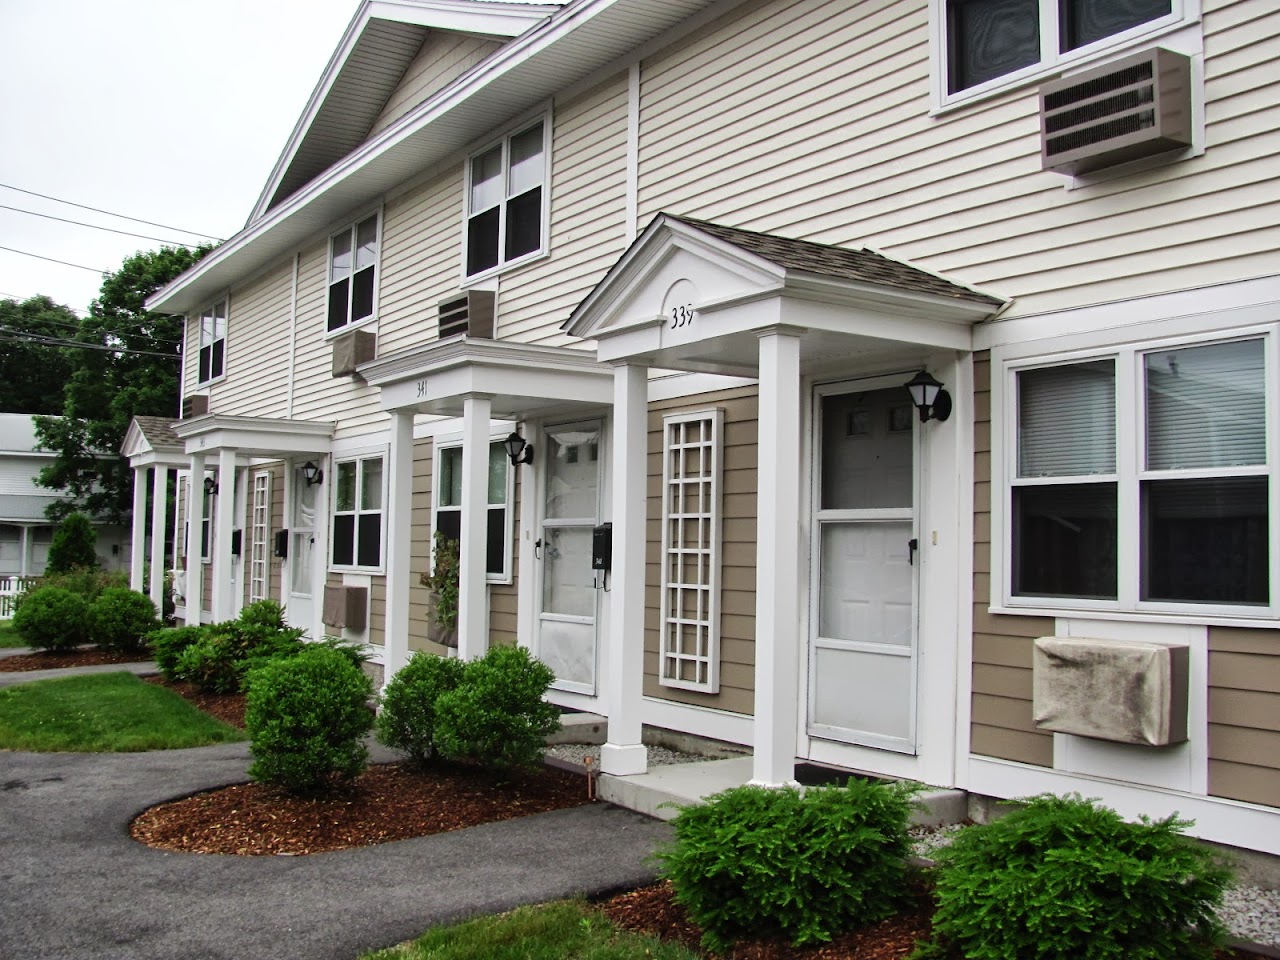 Photo of GEORGETOWNE HOMES 1A. Affordable housing located at 400A GEORGETOWNE DRIVE BOSTON, MA 02136